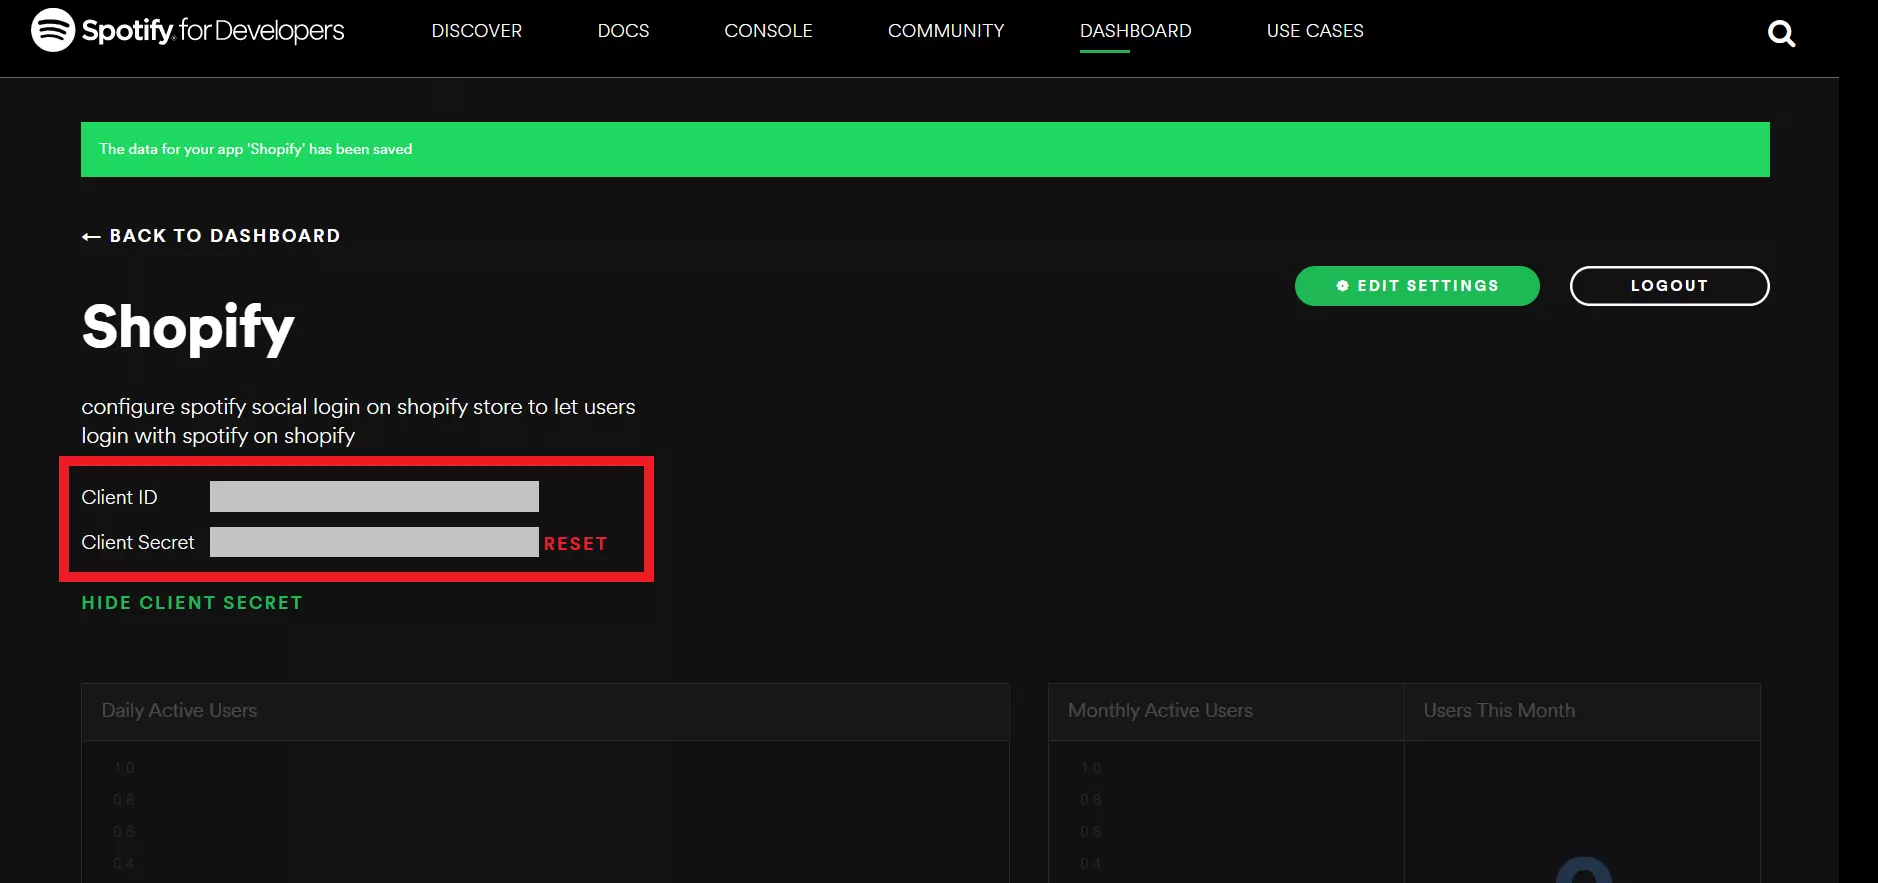 enable spotify copy client id and client secret to configure spotify